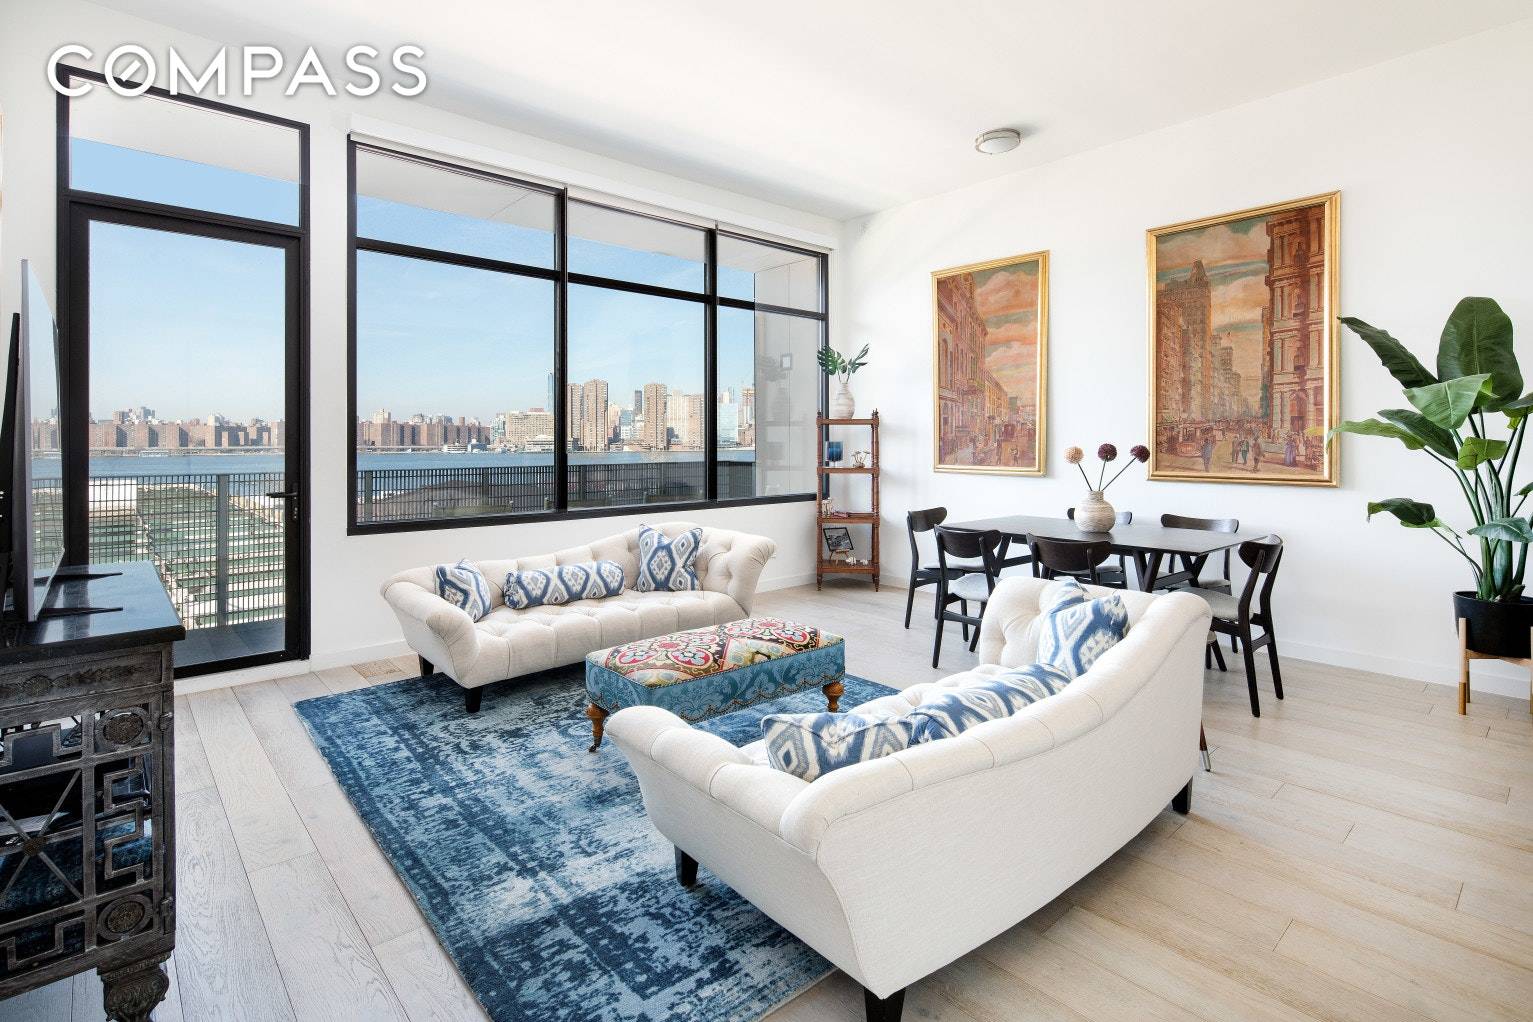 INVESTOR OPPORTUNITY TENANT IN PLACE UNTIL 11 30 19 Stunning views of the East River and Manhattan, this two bedroom, two bathroom penthouse at The Gibraltar boasts a sustainable design ...